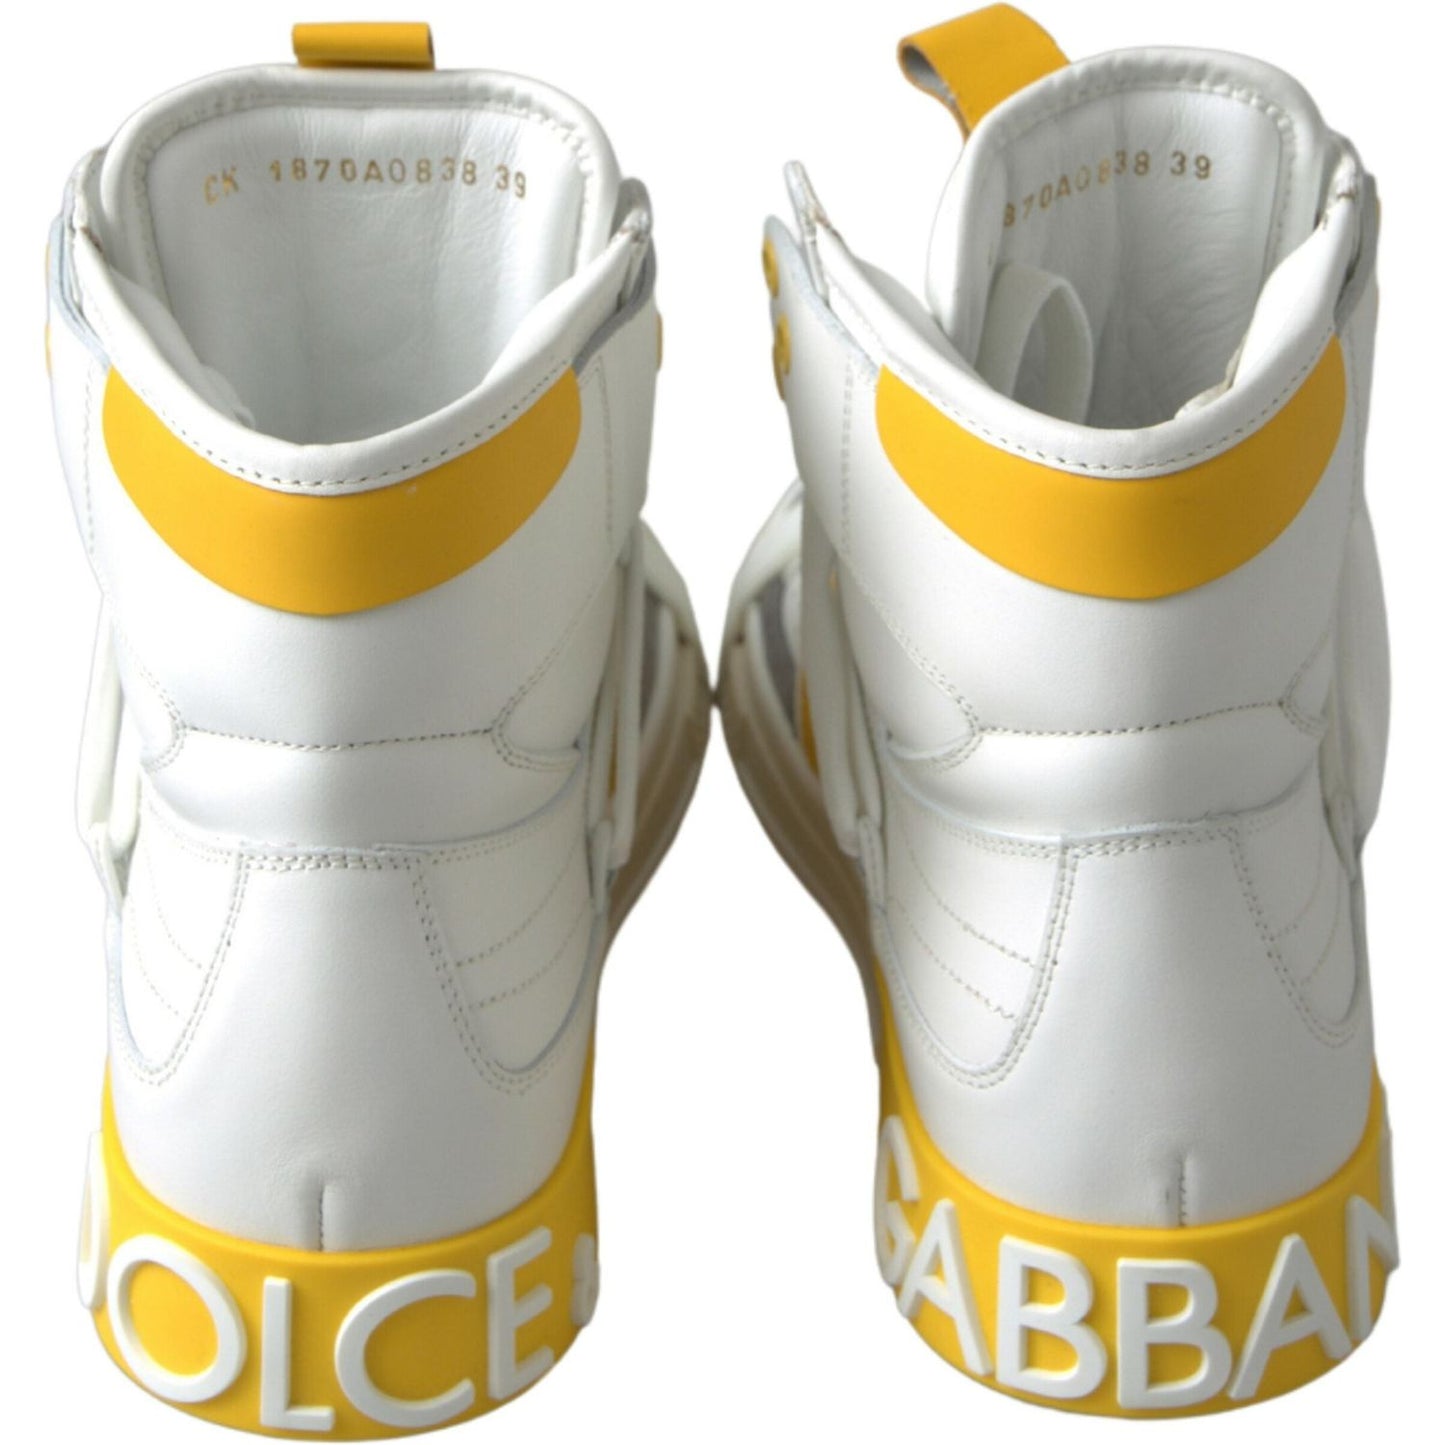 Dolce & Gabbana | High-Top Perforated Leather Sneakers| McRichard Designer Brands   